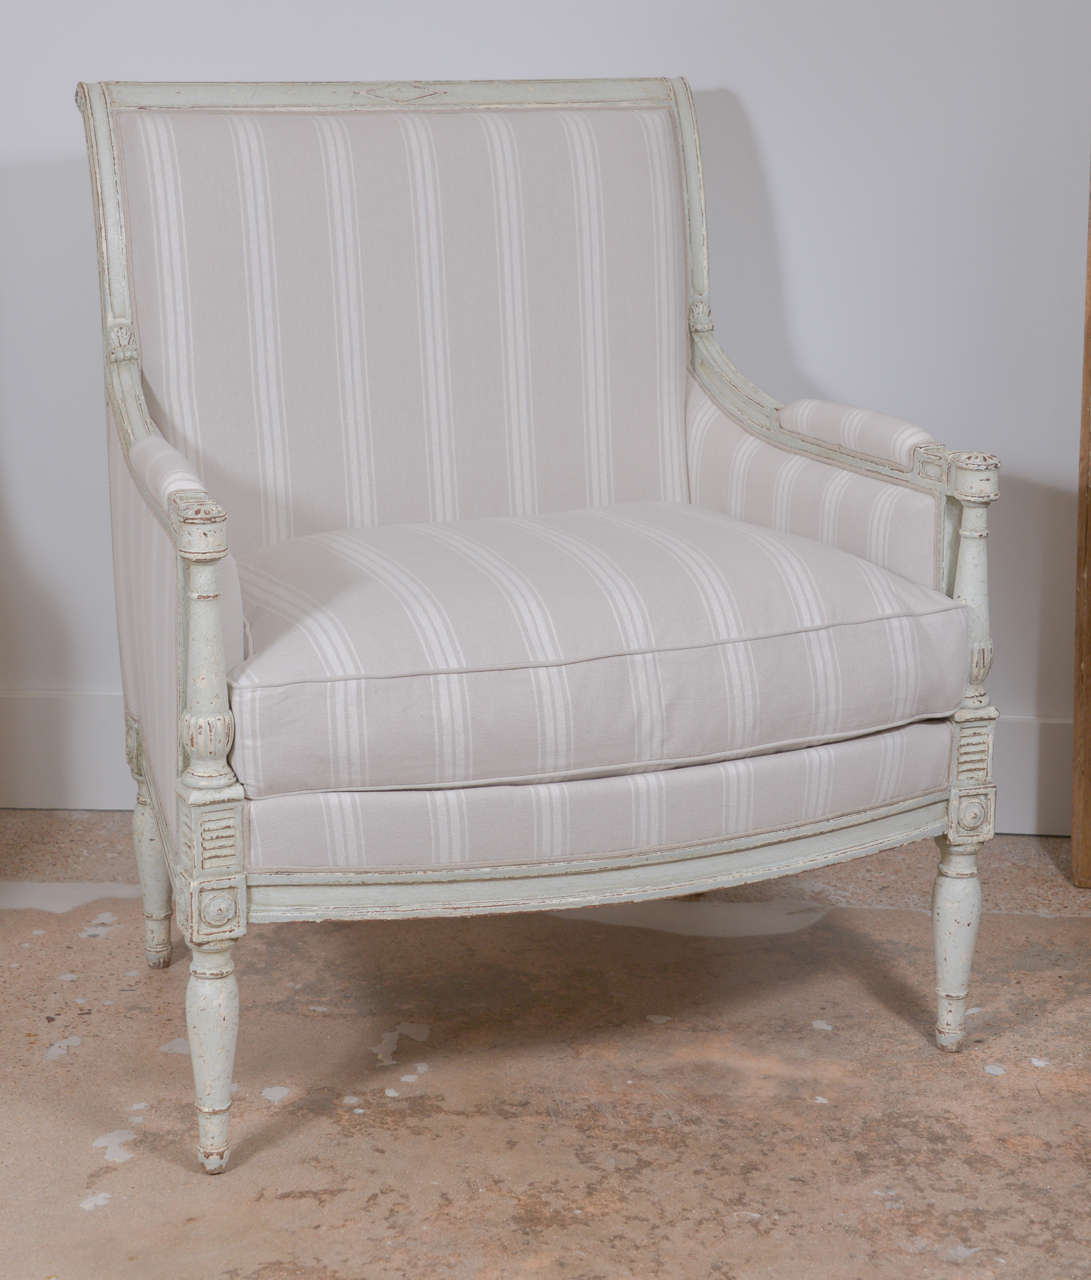 Pair of Painted Bergères hand-carved in the late 19th century in Directoire style. Later paint and newly upholstered in neutral stripes.